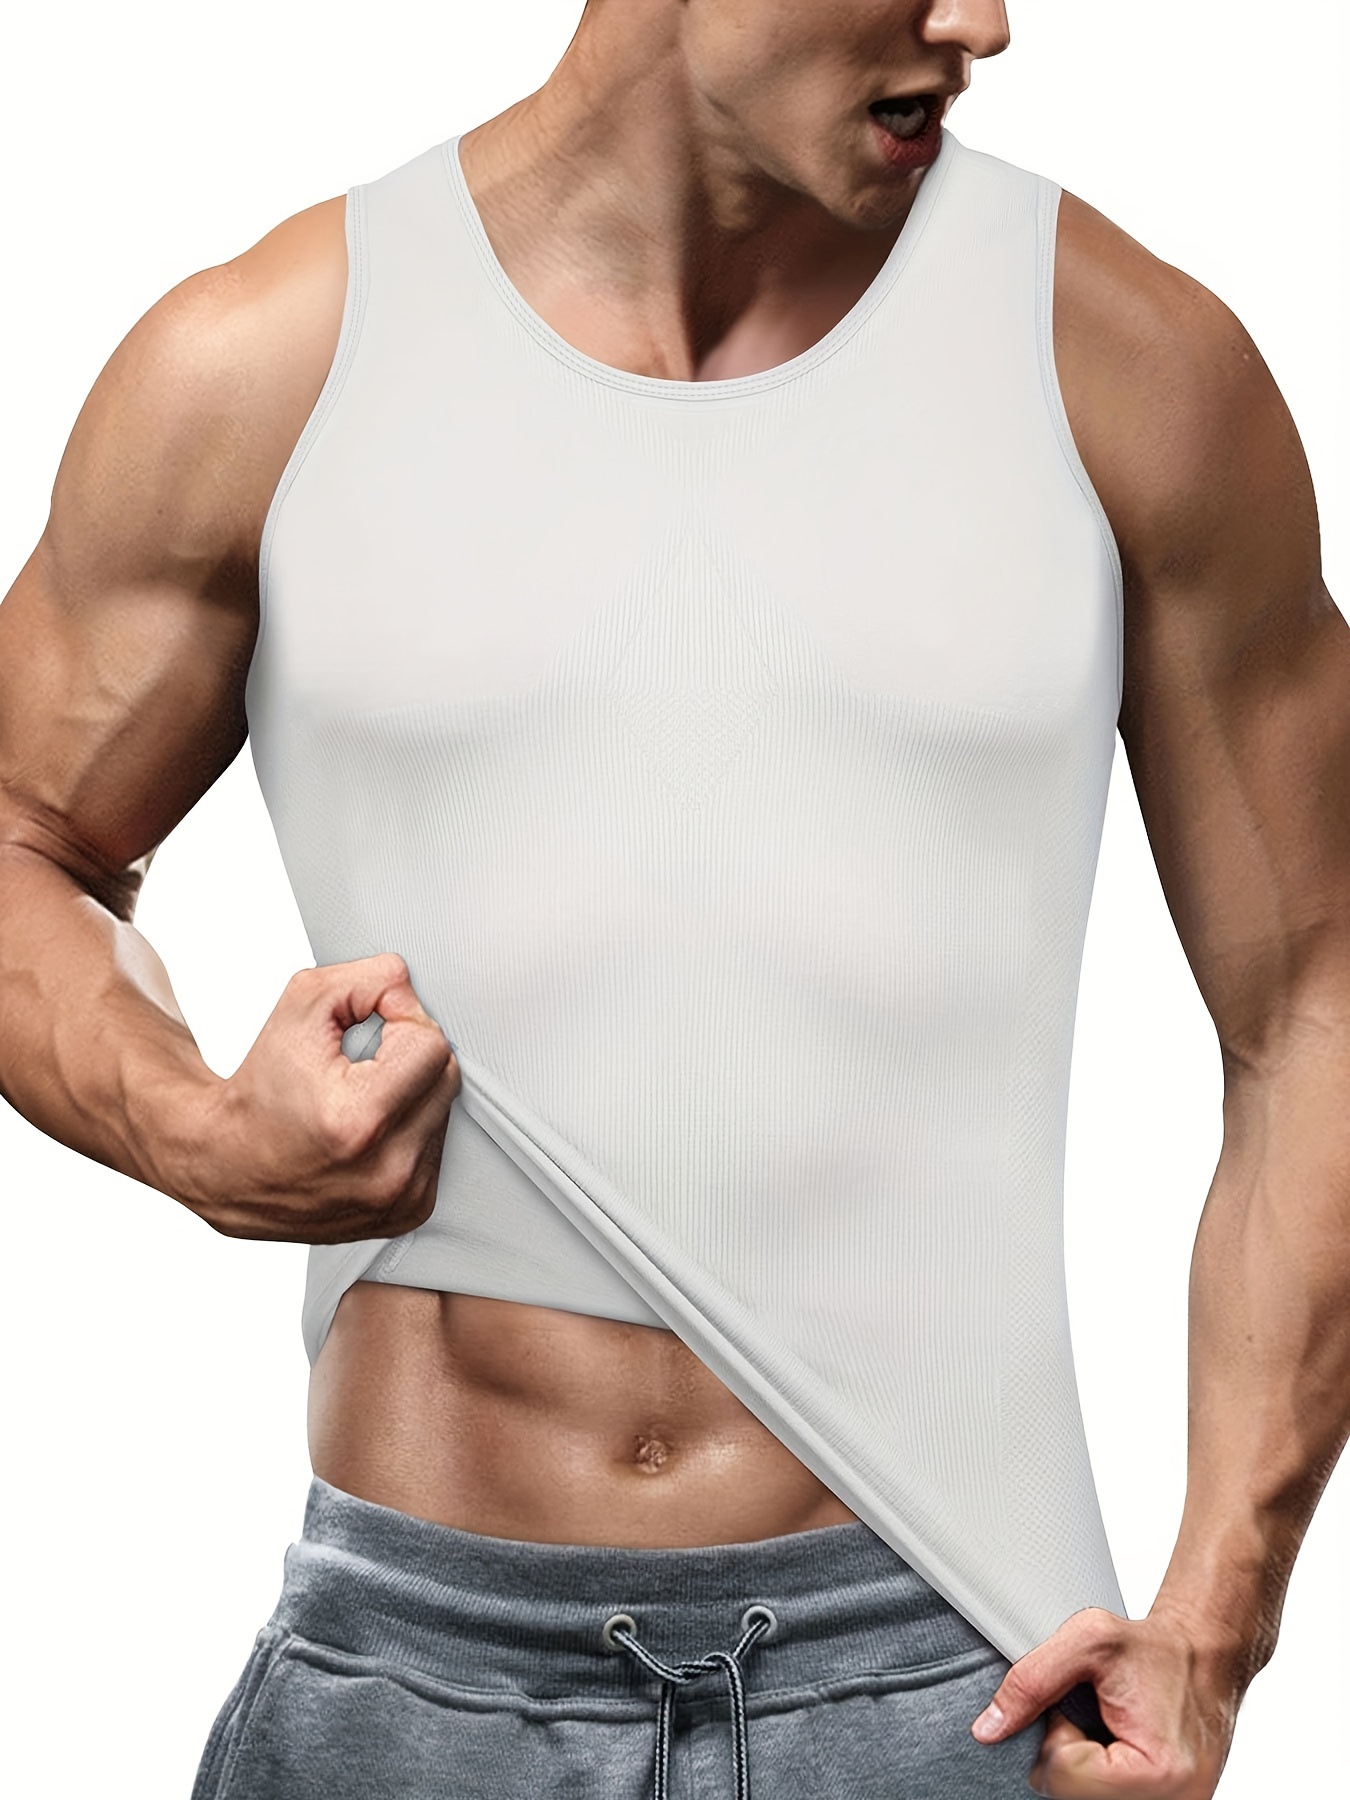 Men Shapewear Slimming Body Shaper Compressed Shirt Tank Top With